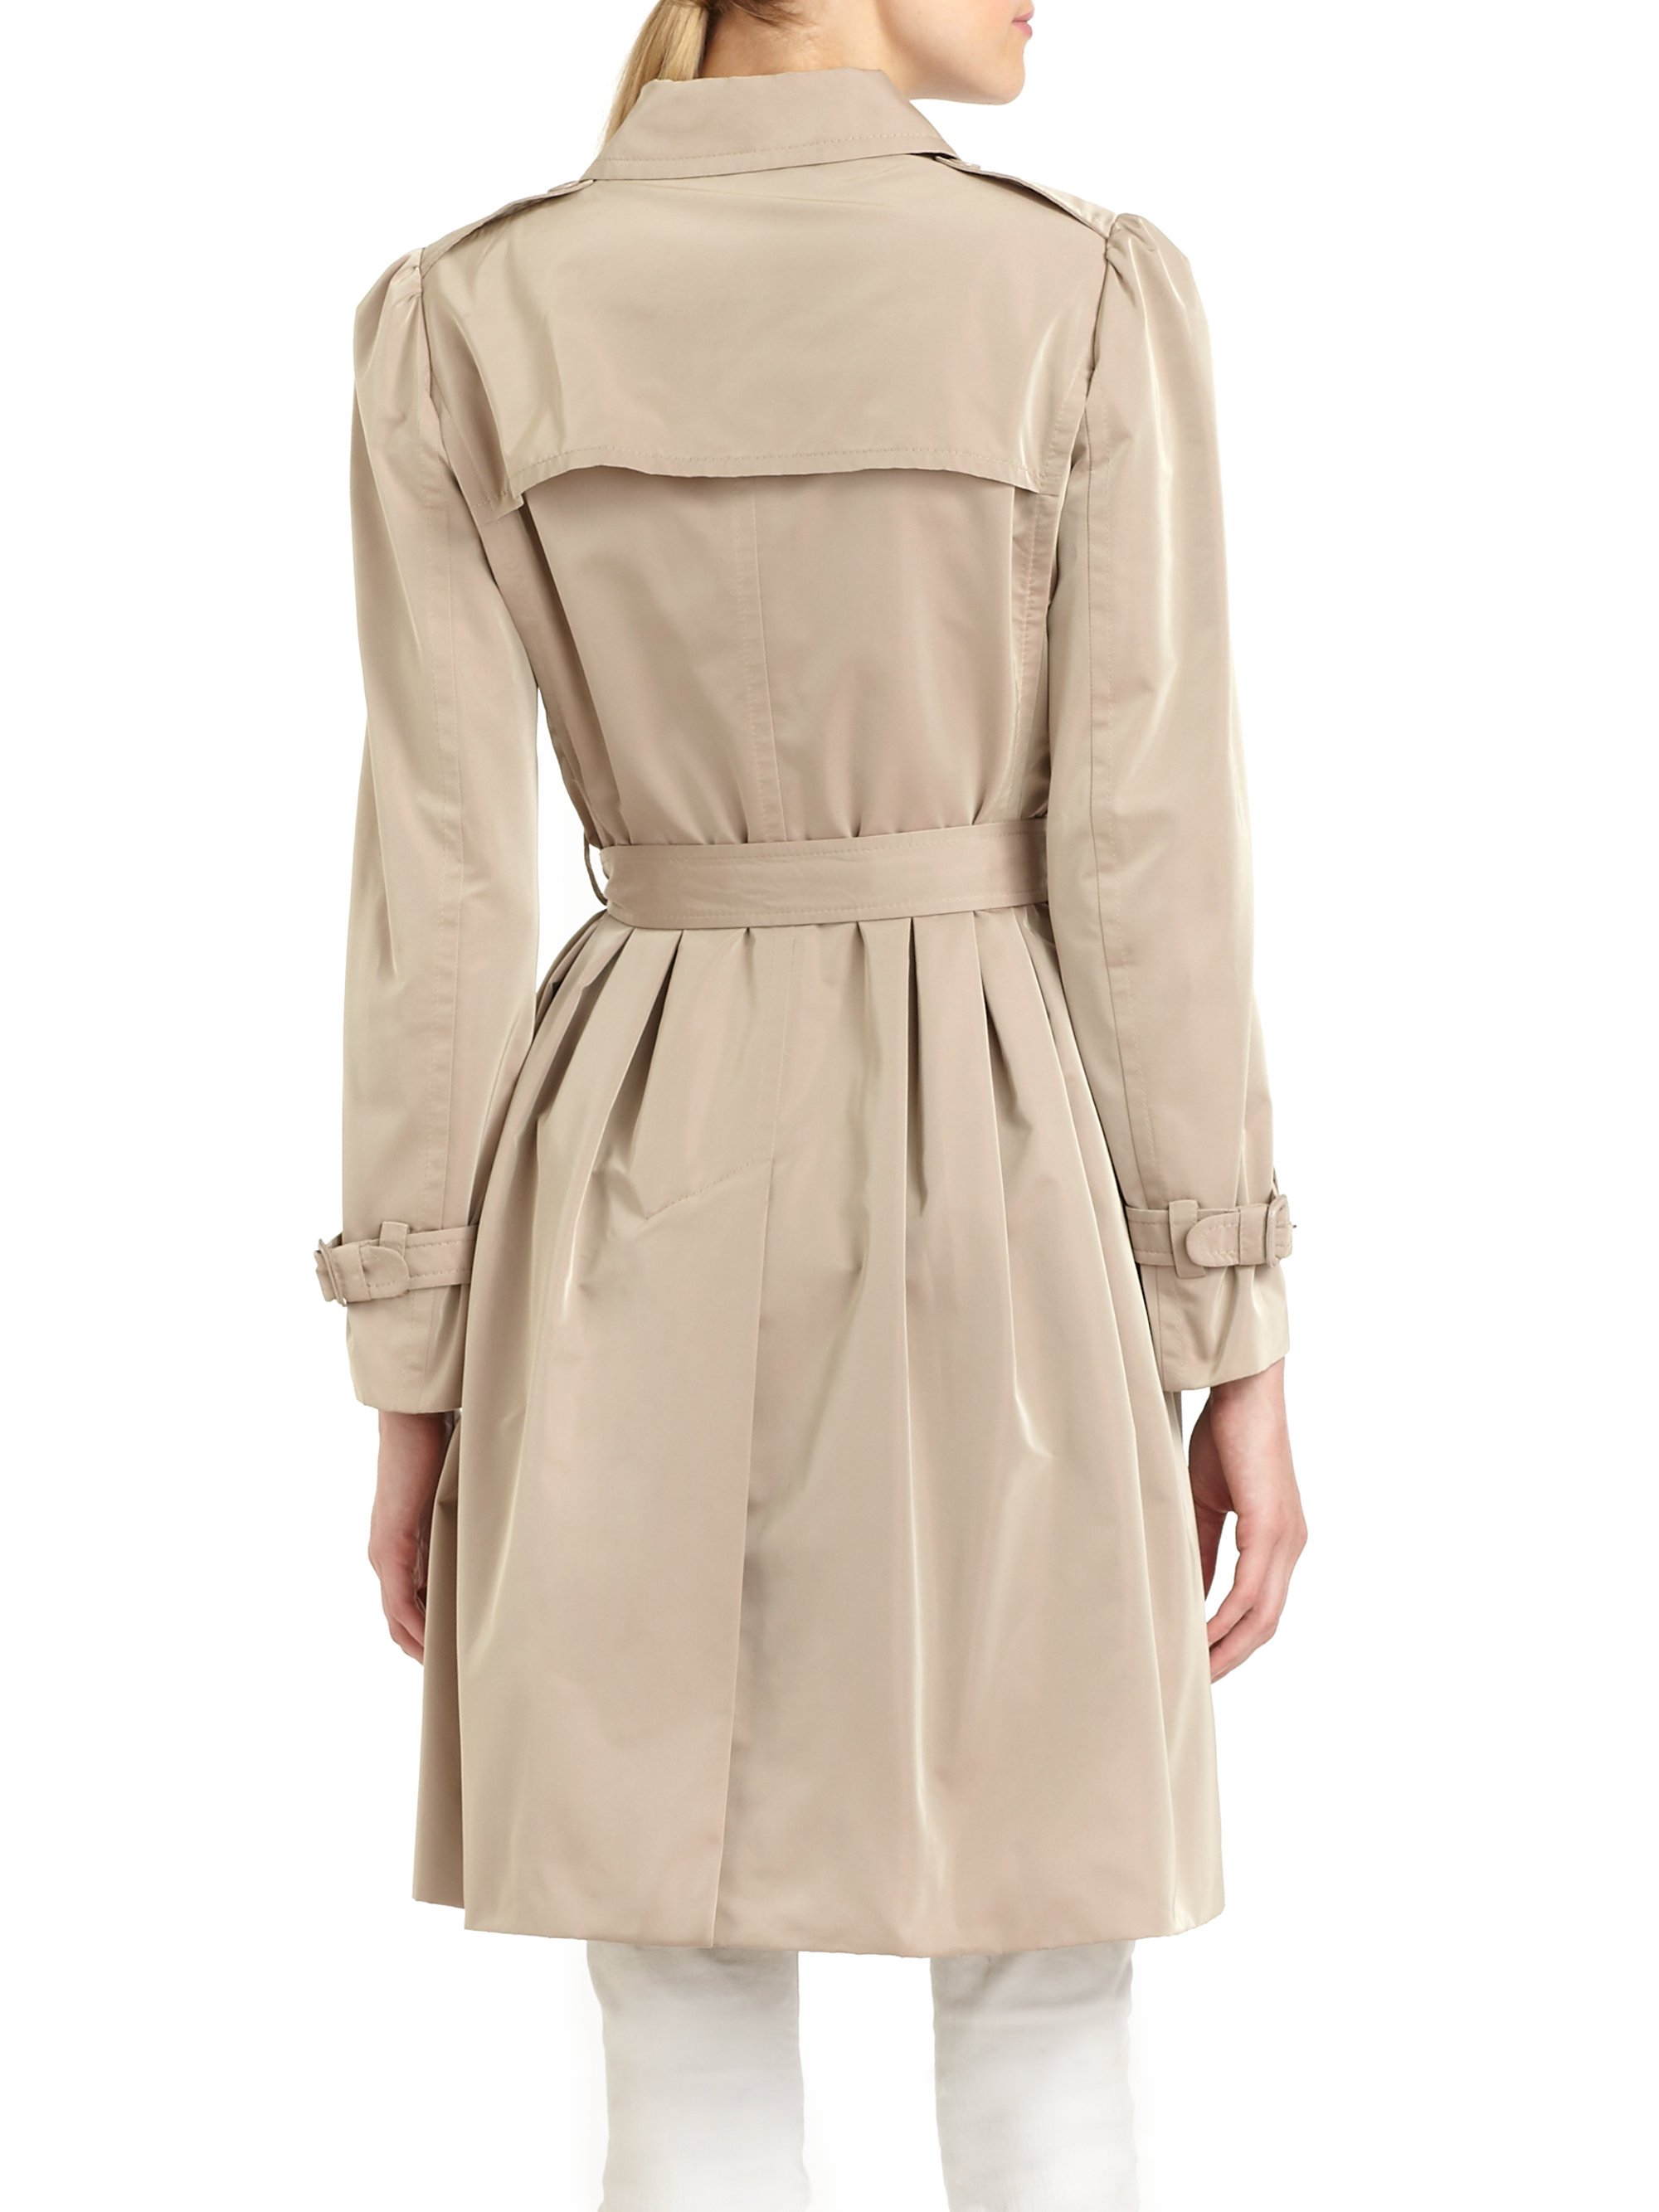 Lyst - Dolce & gabbana Belted Trench Coat in Brown